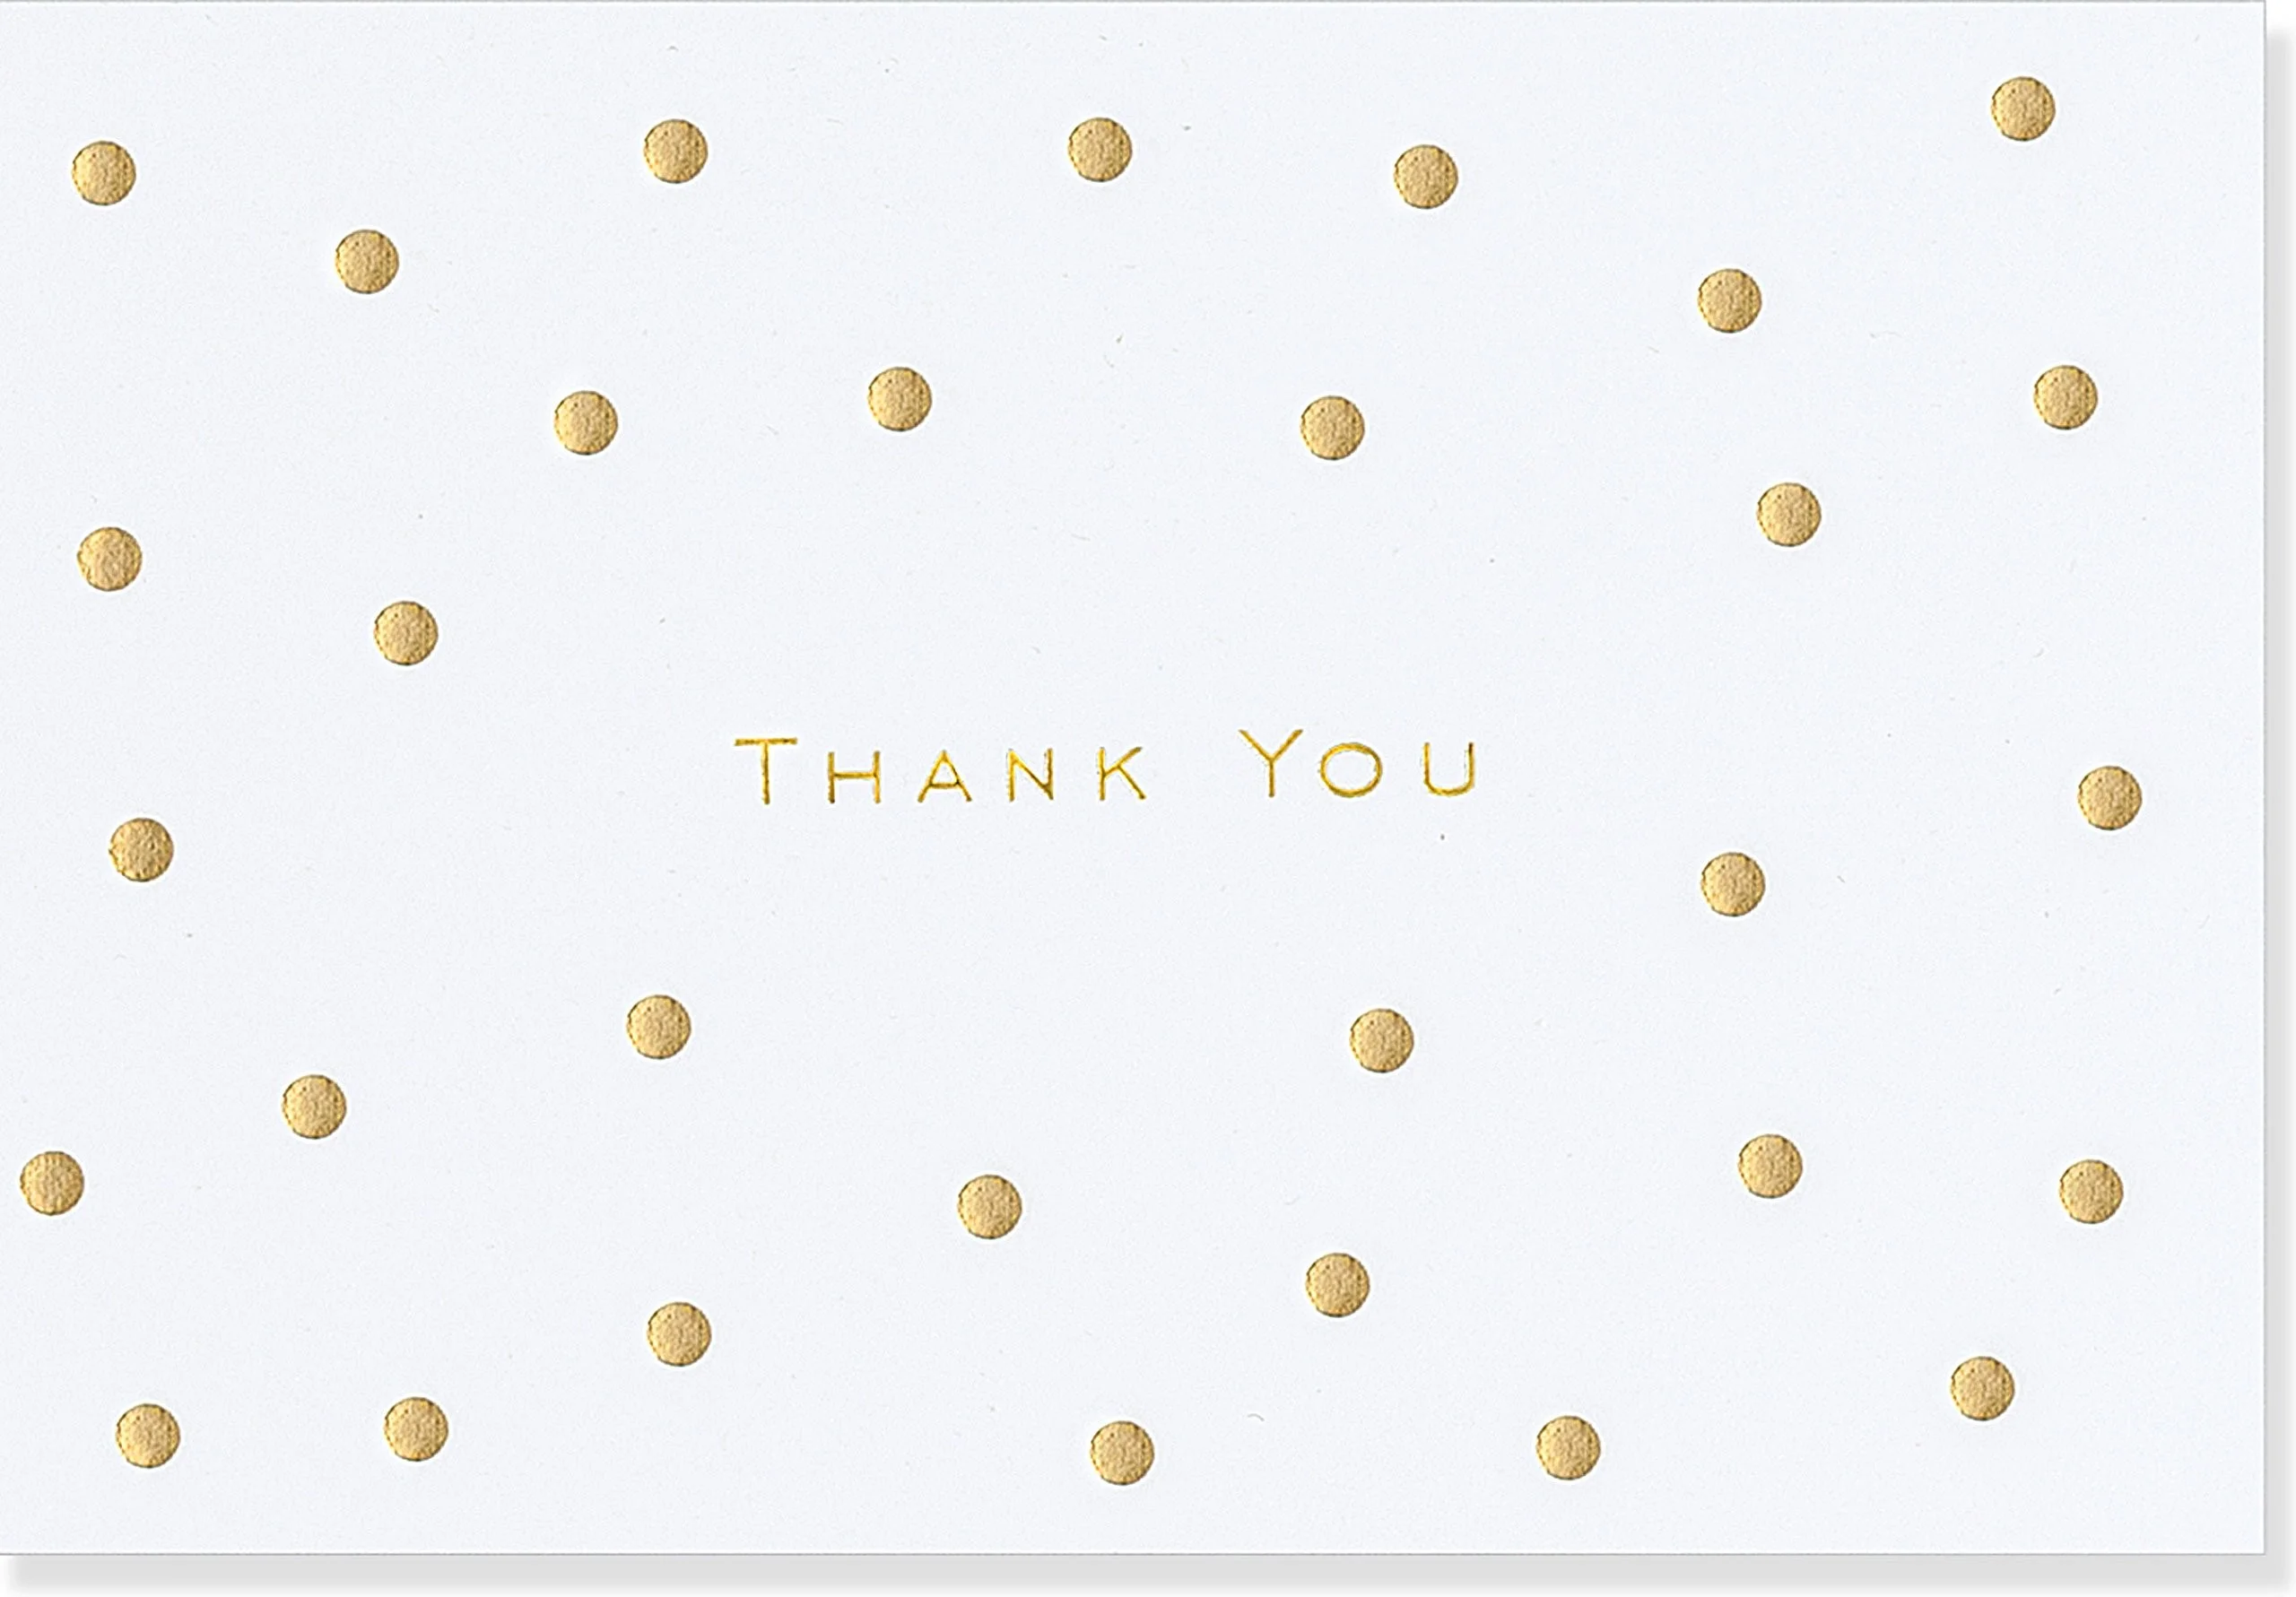 Gold Dots Thank You Notes Stationery, Note Cards, Boxed Cards Peter Pauper Press 9781441319005 Amazon.com Books